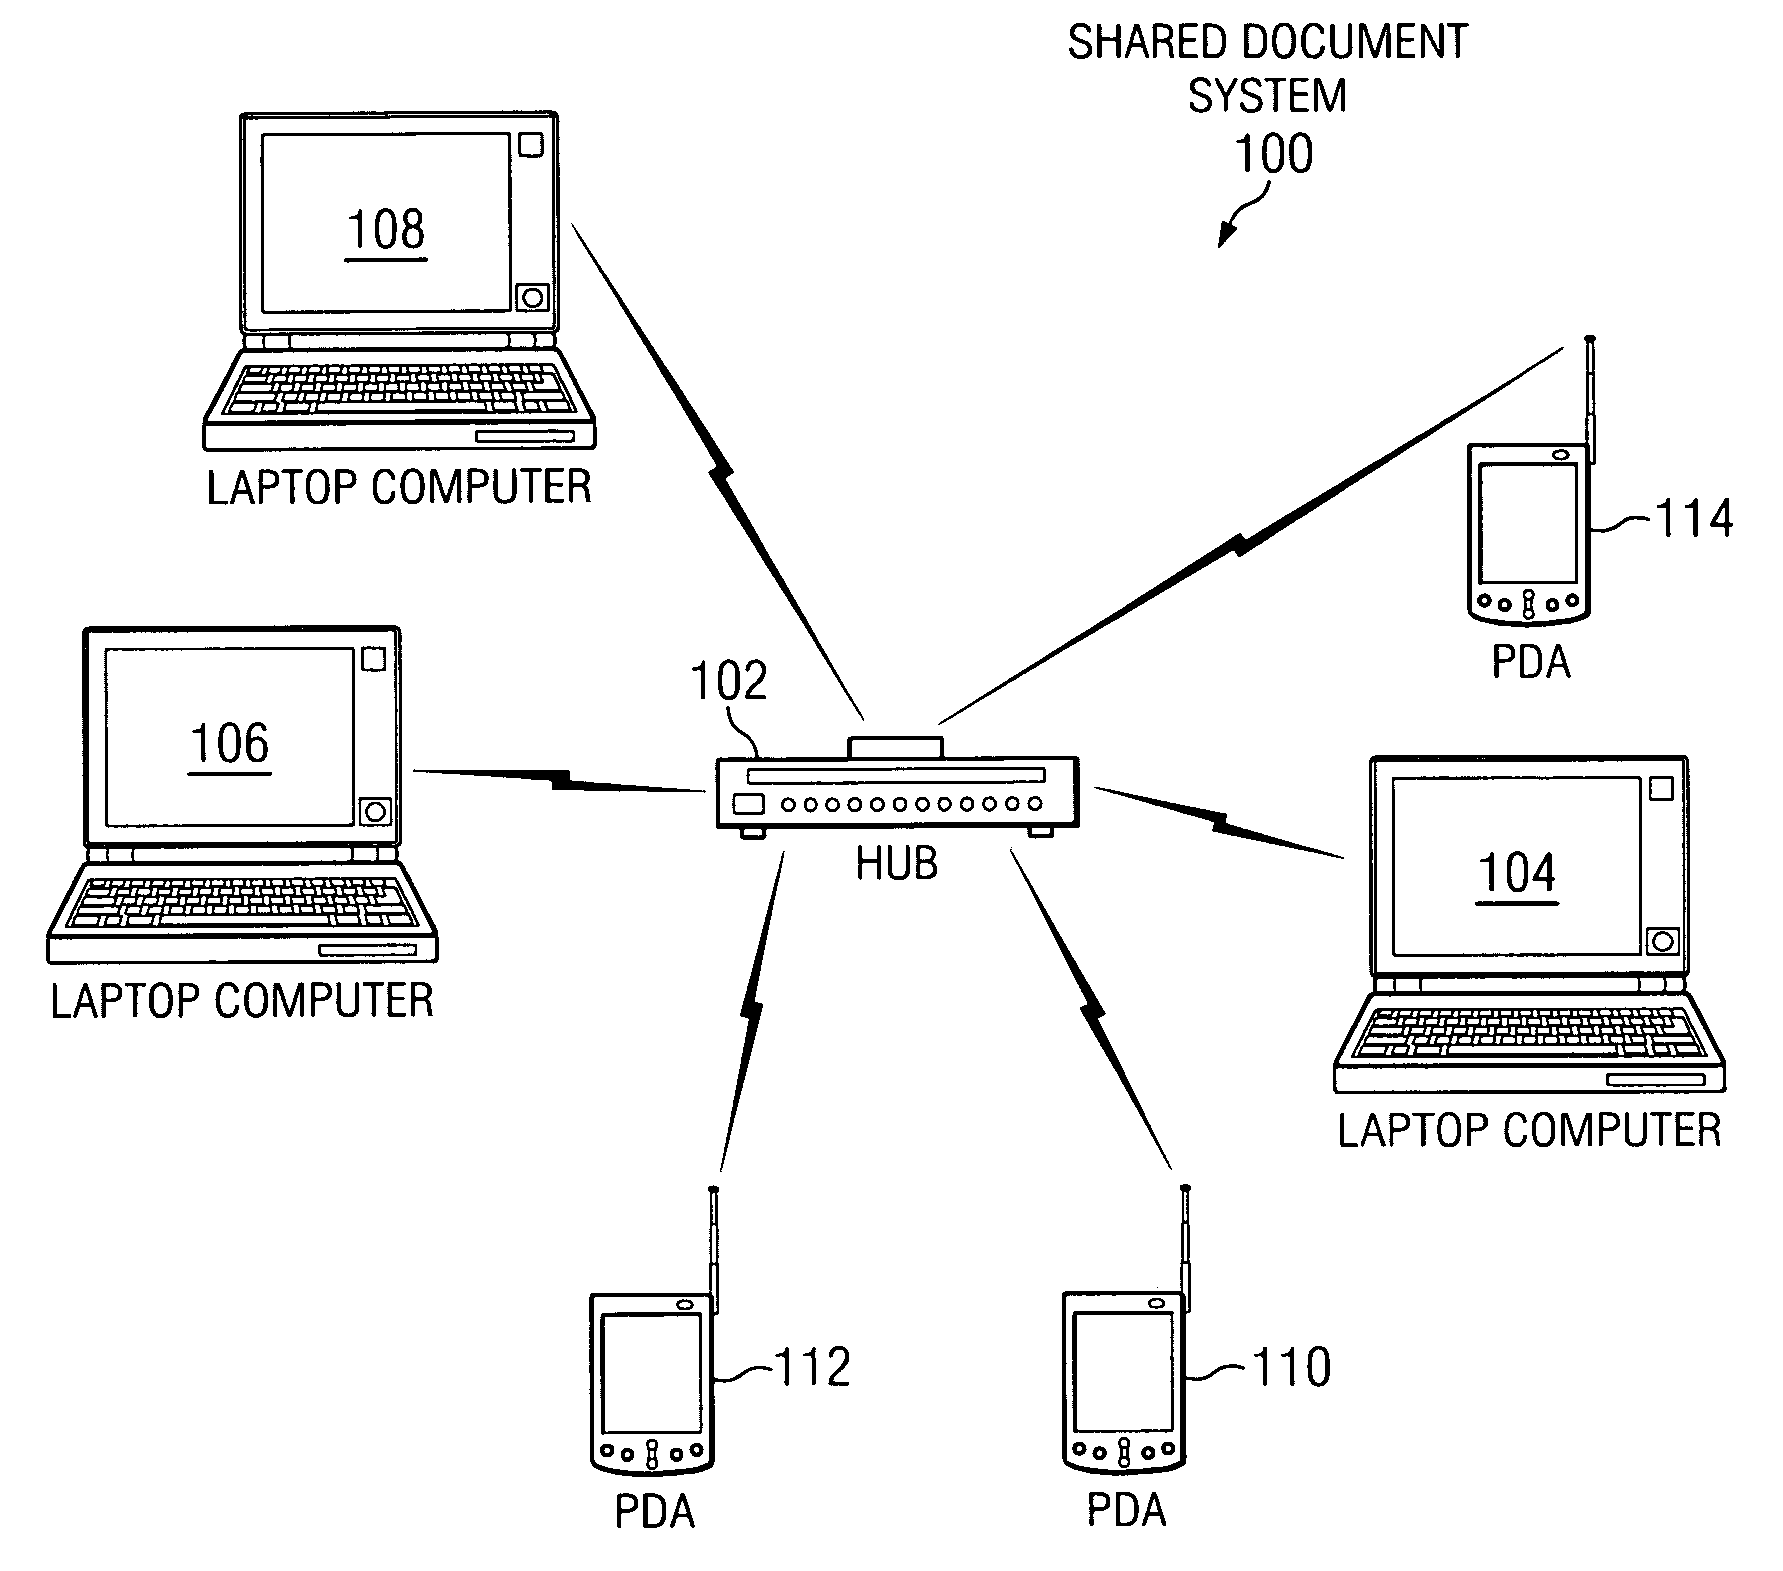 Instant selective multiple soft document sharing between multiple heterogeneous computing devices